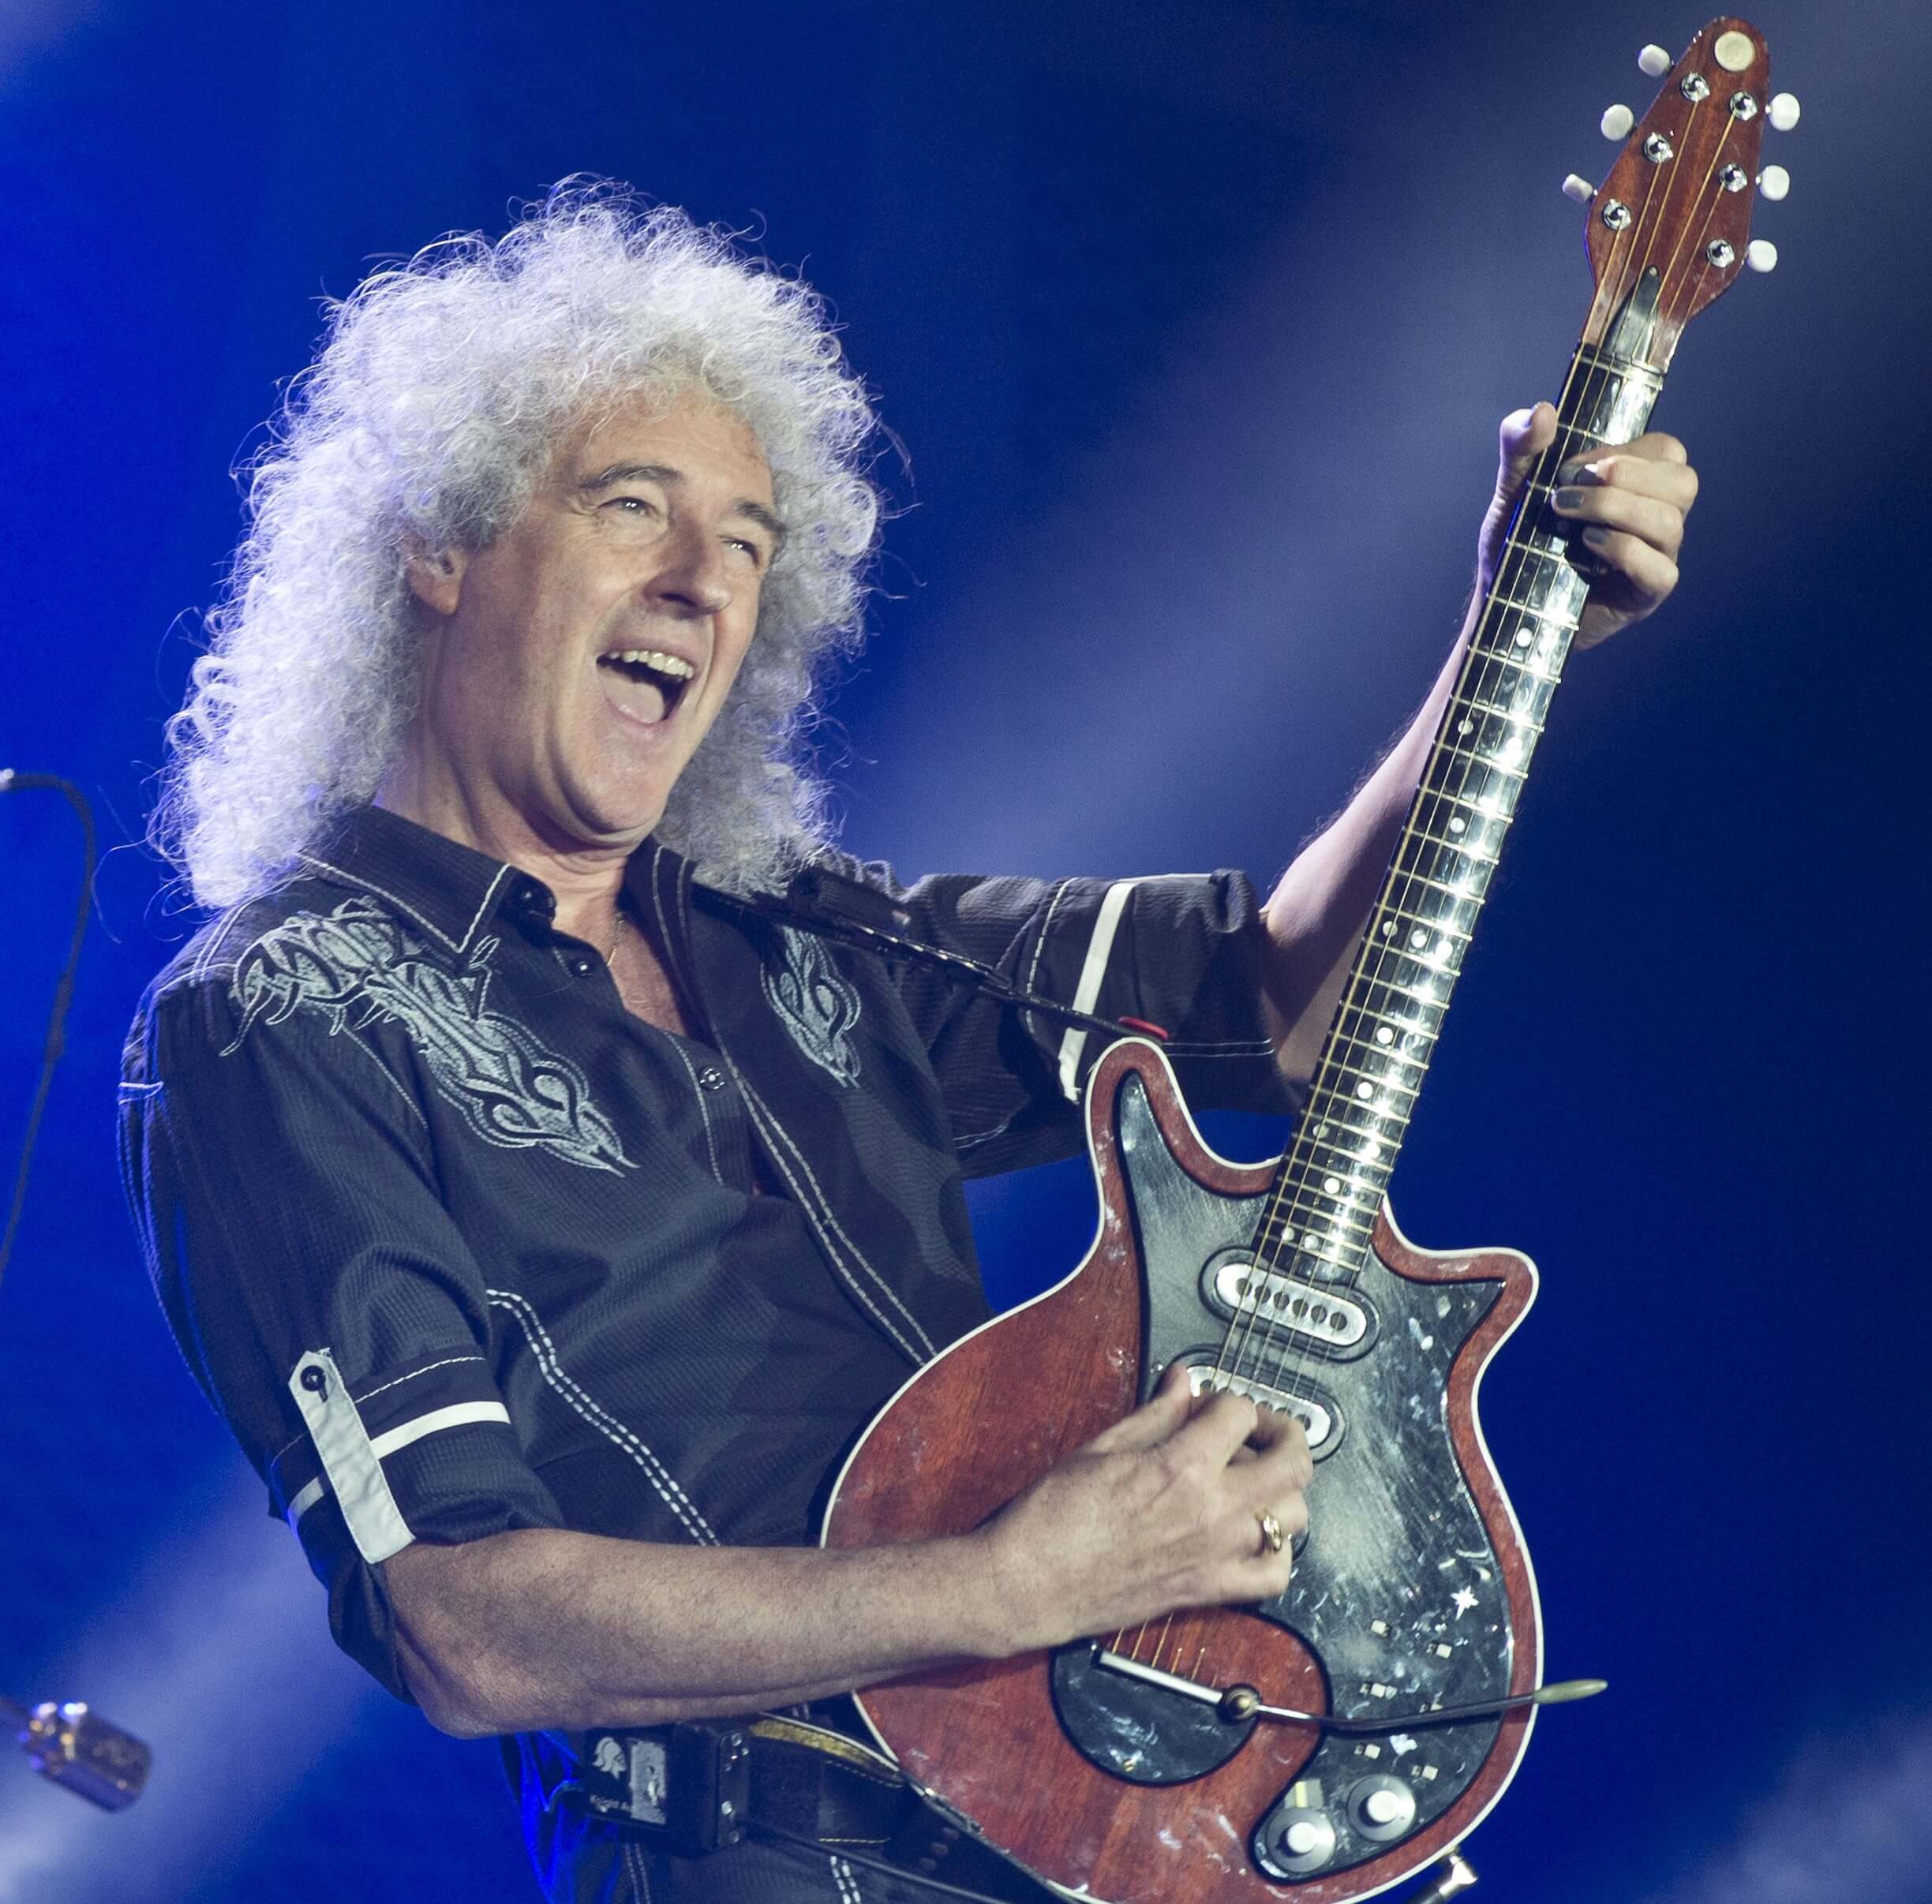 Brian May of Queen with a guitar